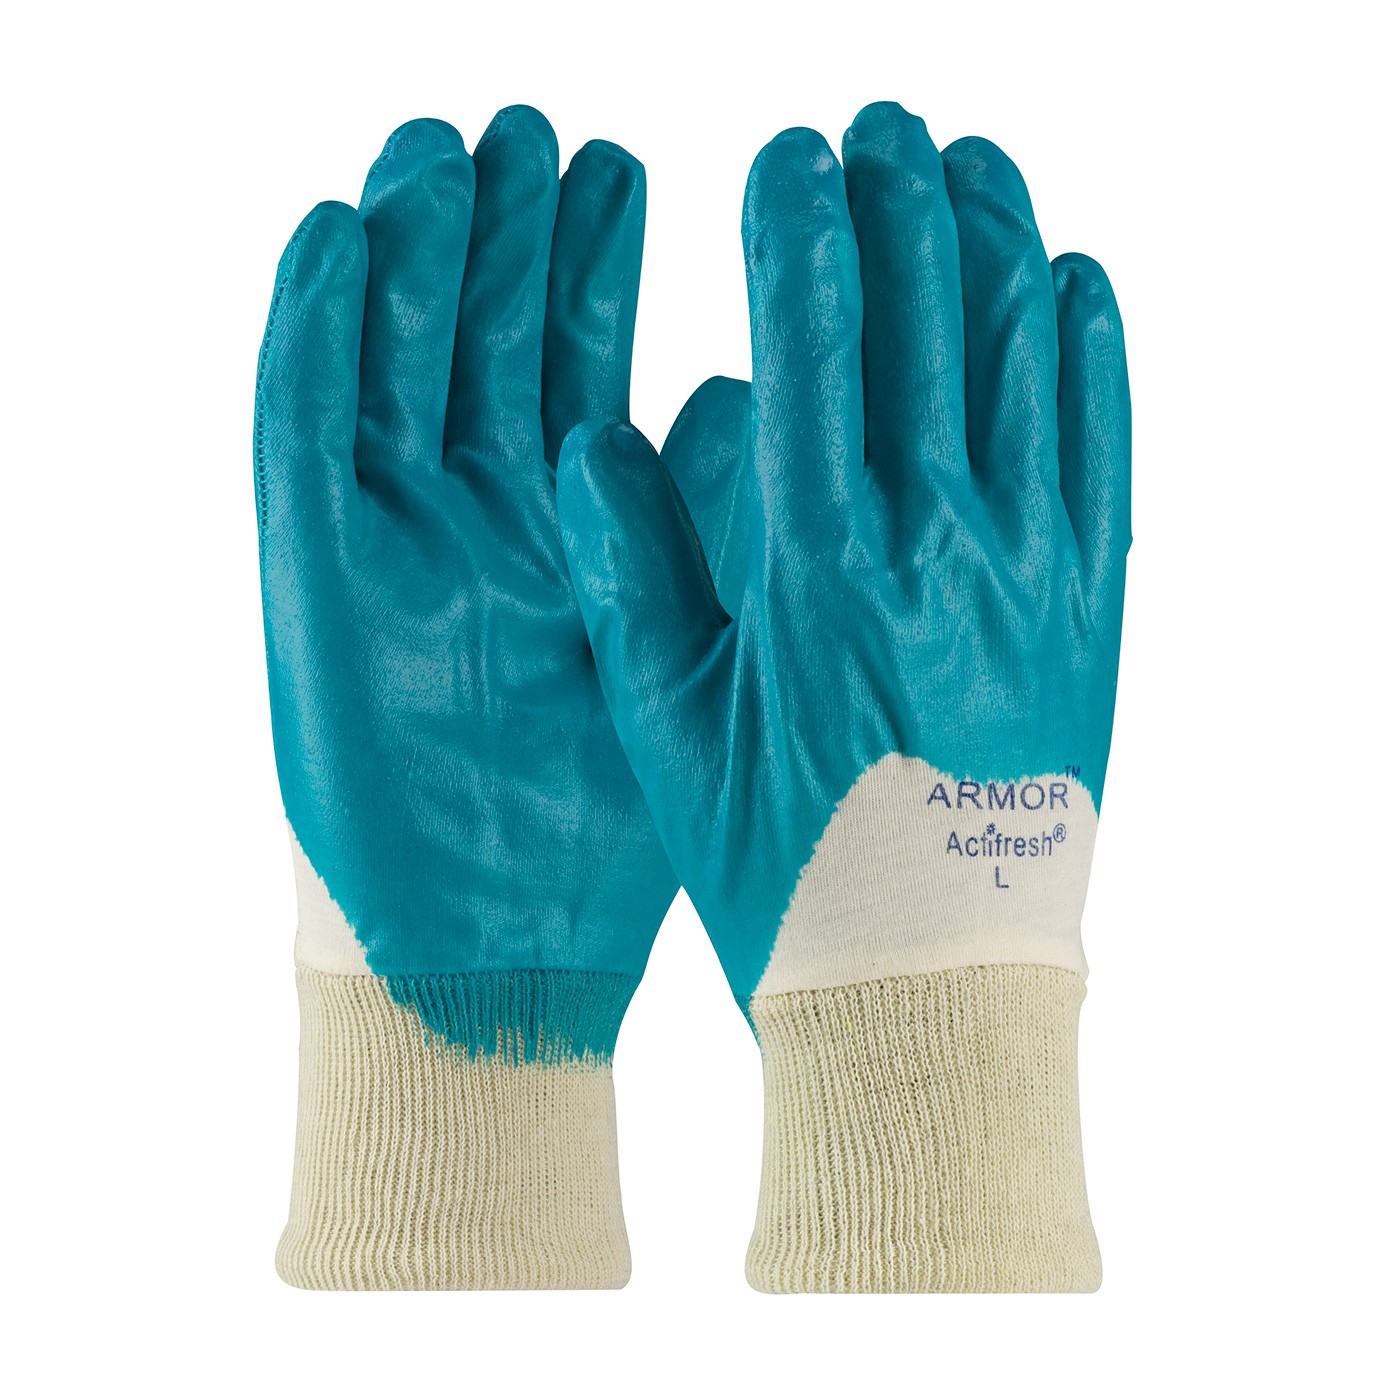 ArmorFlex® Nitrile Dipped Glove with Interlock Liner and Smooth Finish on Palm, Fingers & Knuckles - Knitwrist  (#56-3180)